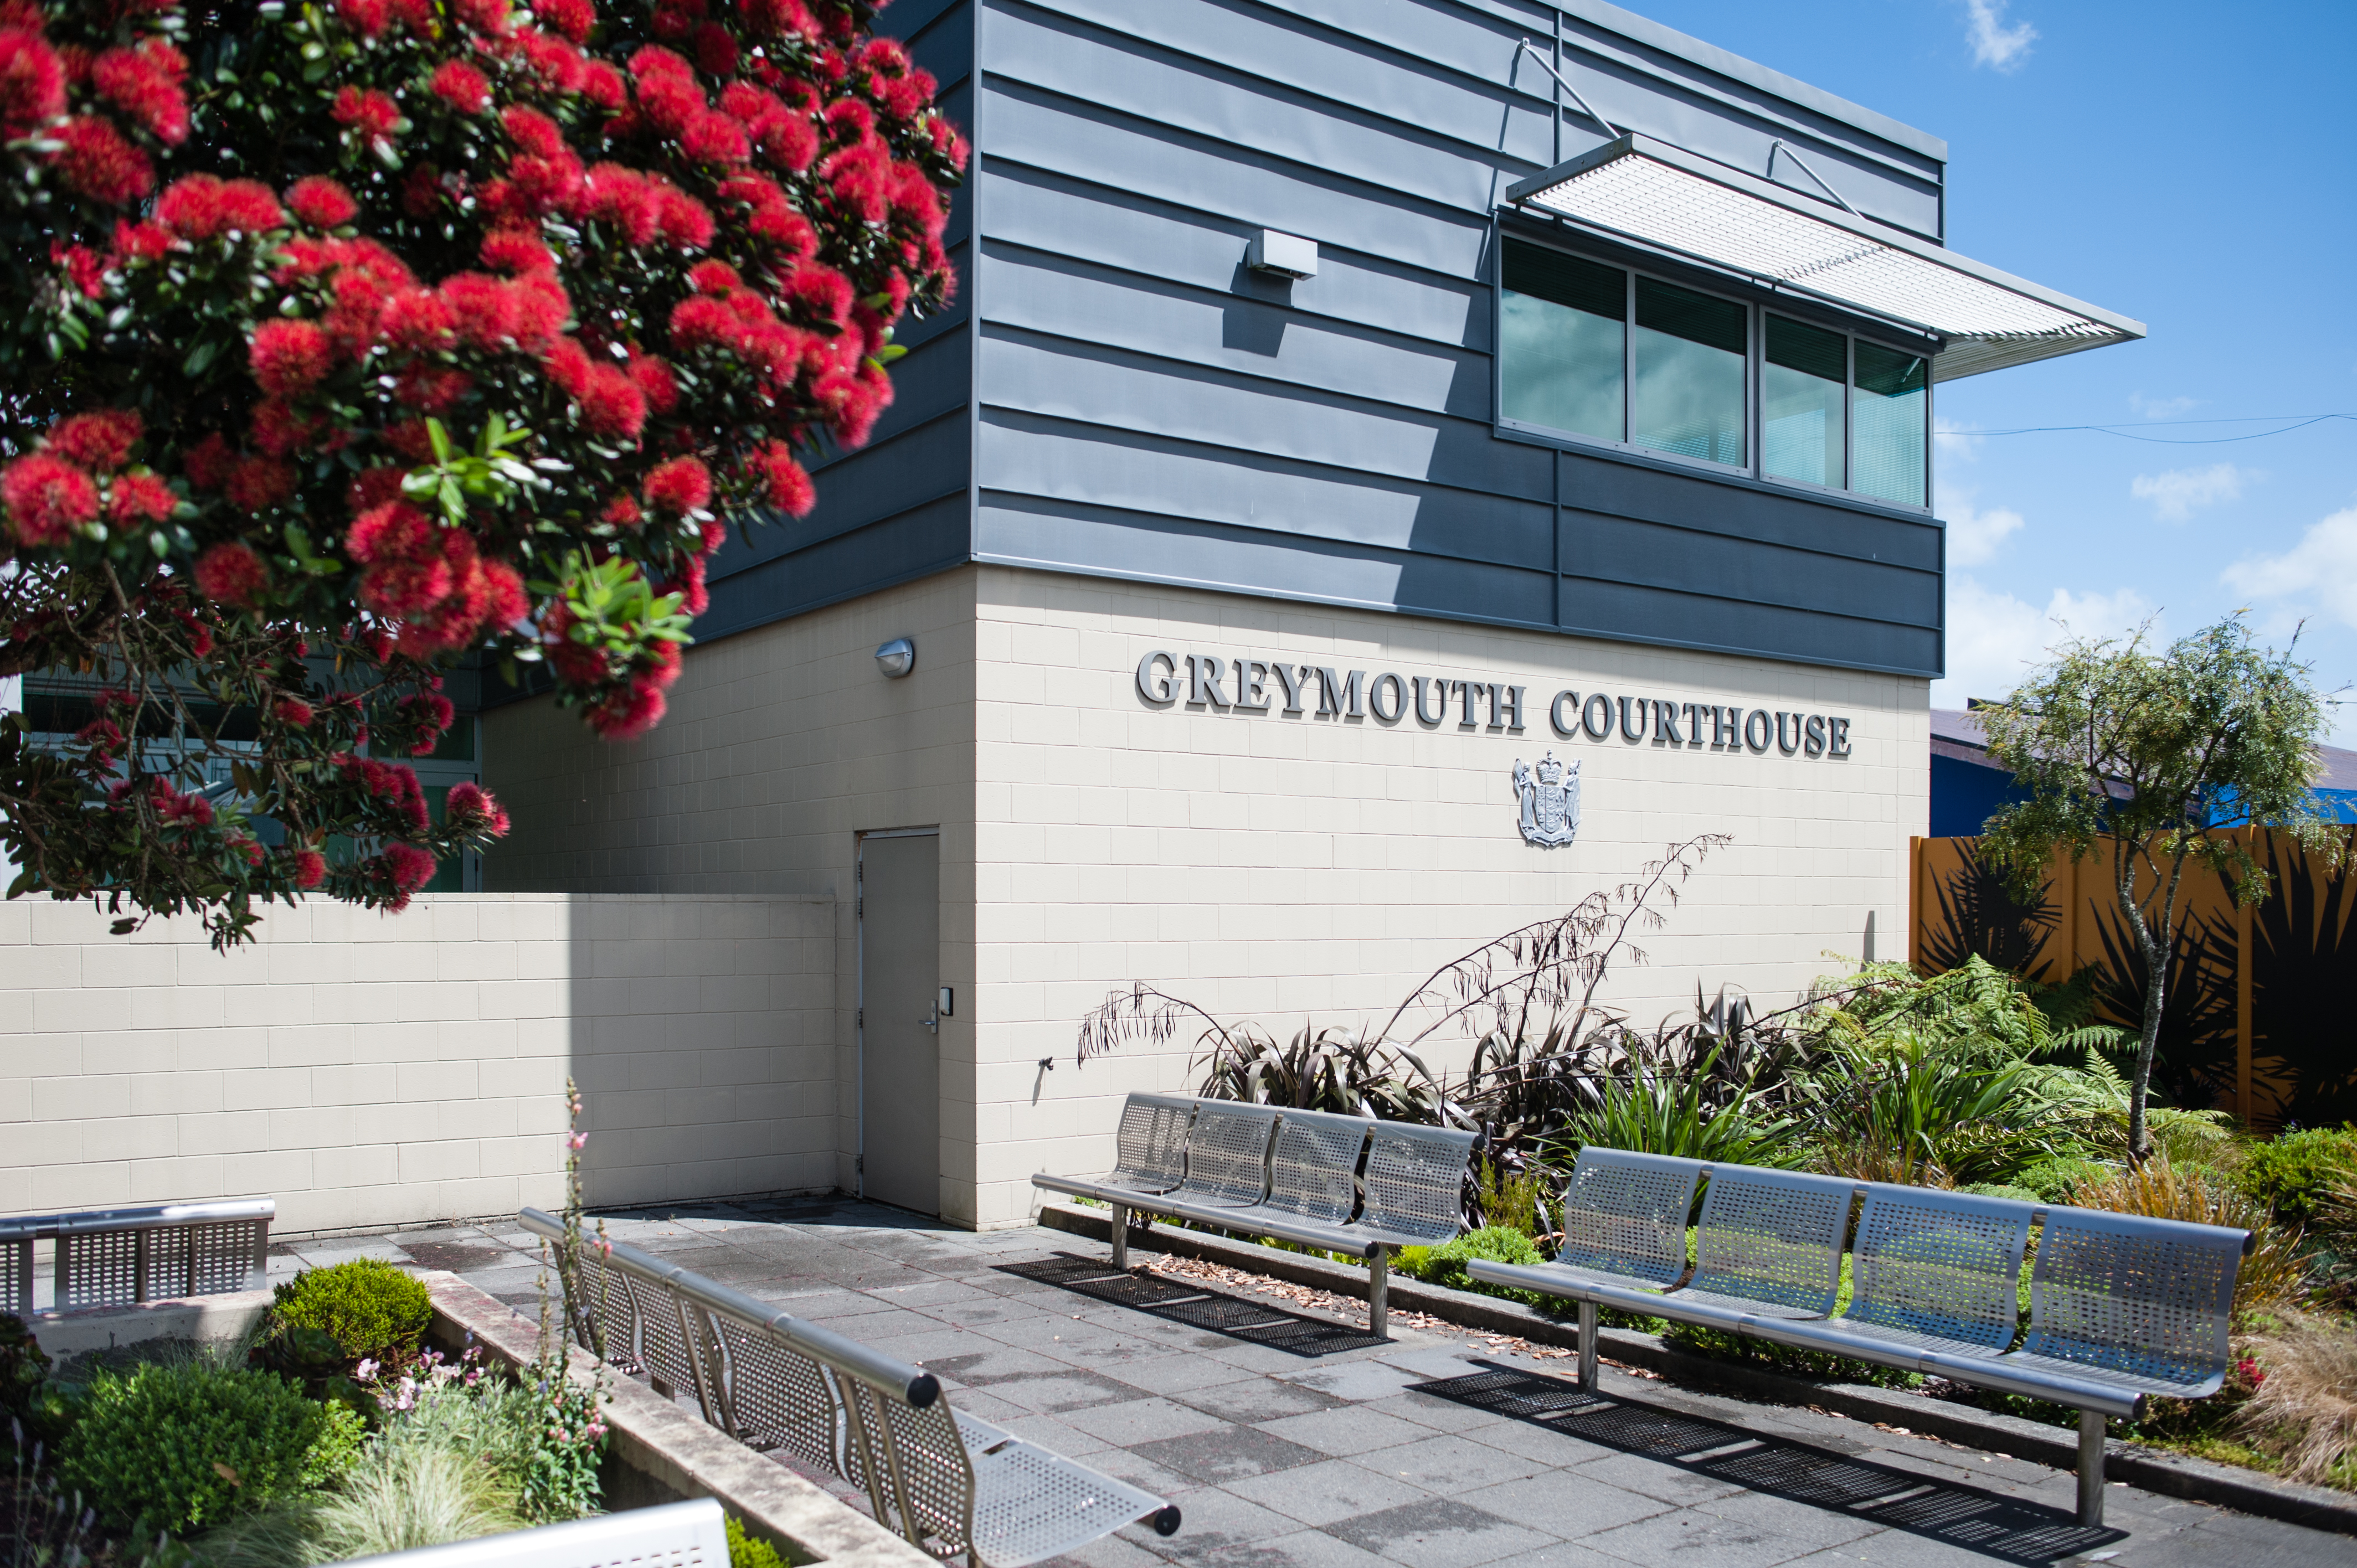 Greymouth Courthouse